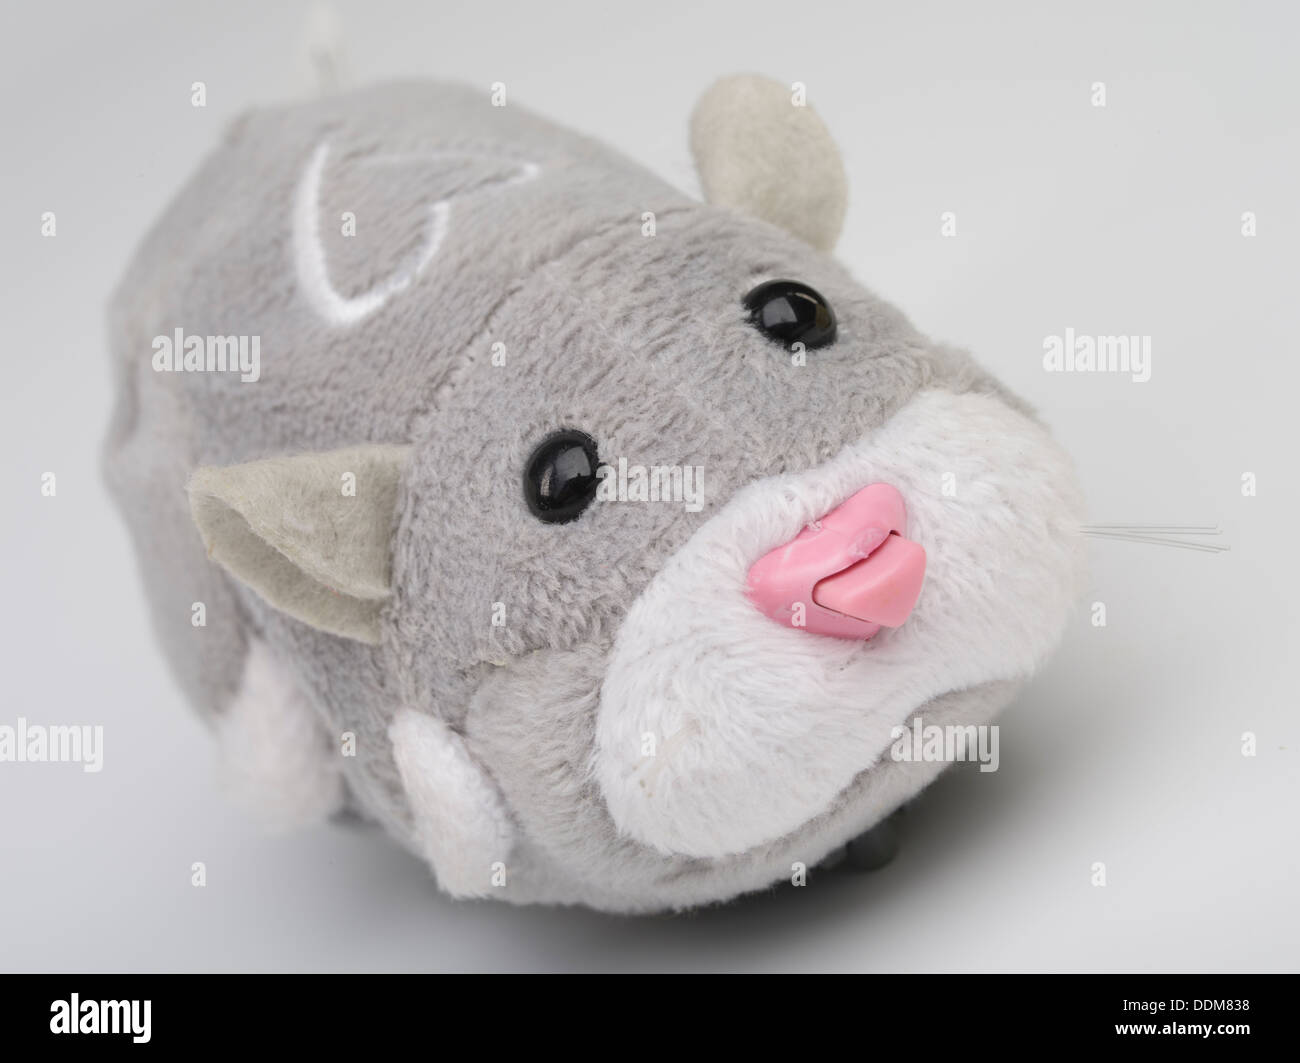 Zhu Zhu Pets by Cepia LLC Robotic hamster toys that were at Christmas 2009 craze Stock Photo